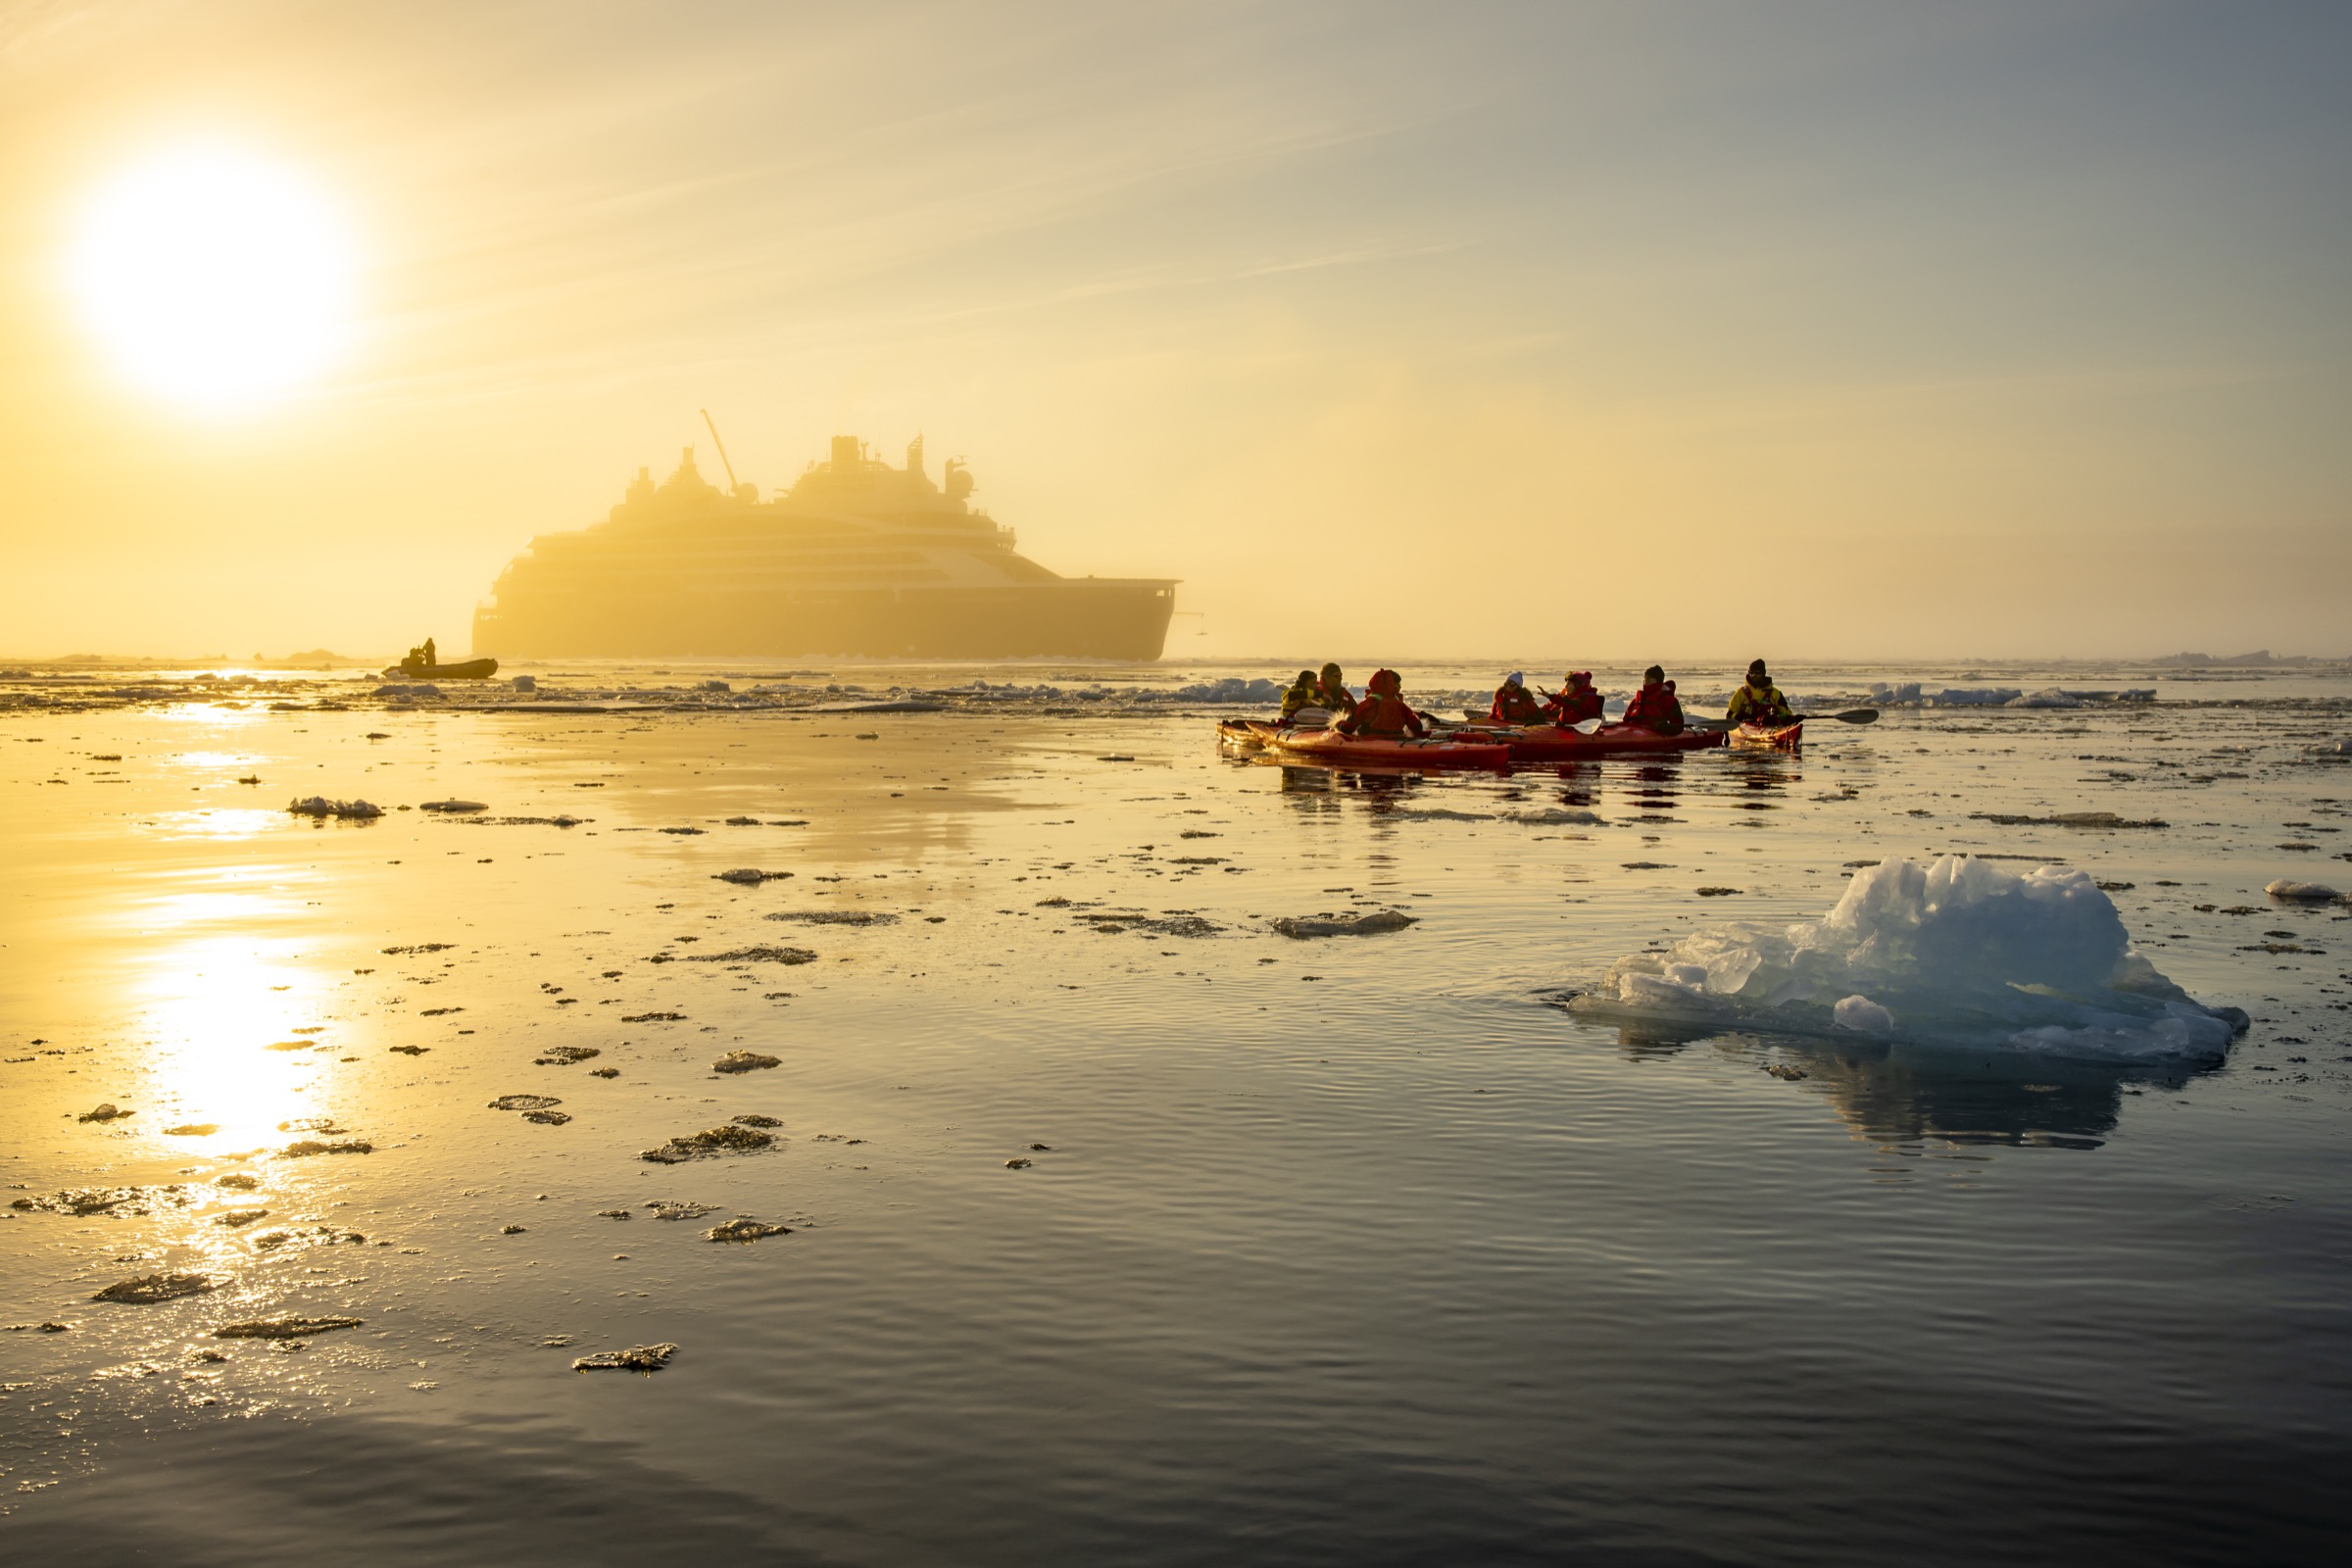 Kayakers around Ponant's Le Commandant Charcot, a passenger ship that takes travelers to the Geographic North Pole. (Olivier Blaud—PONANT)